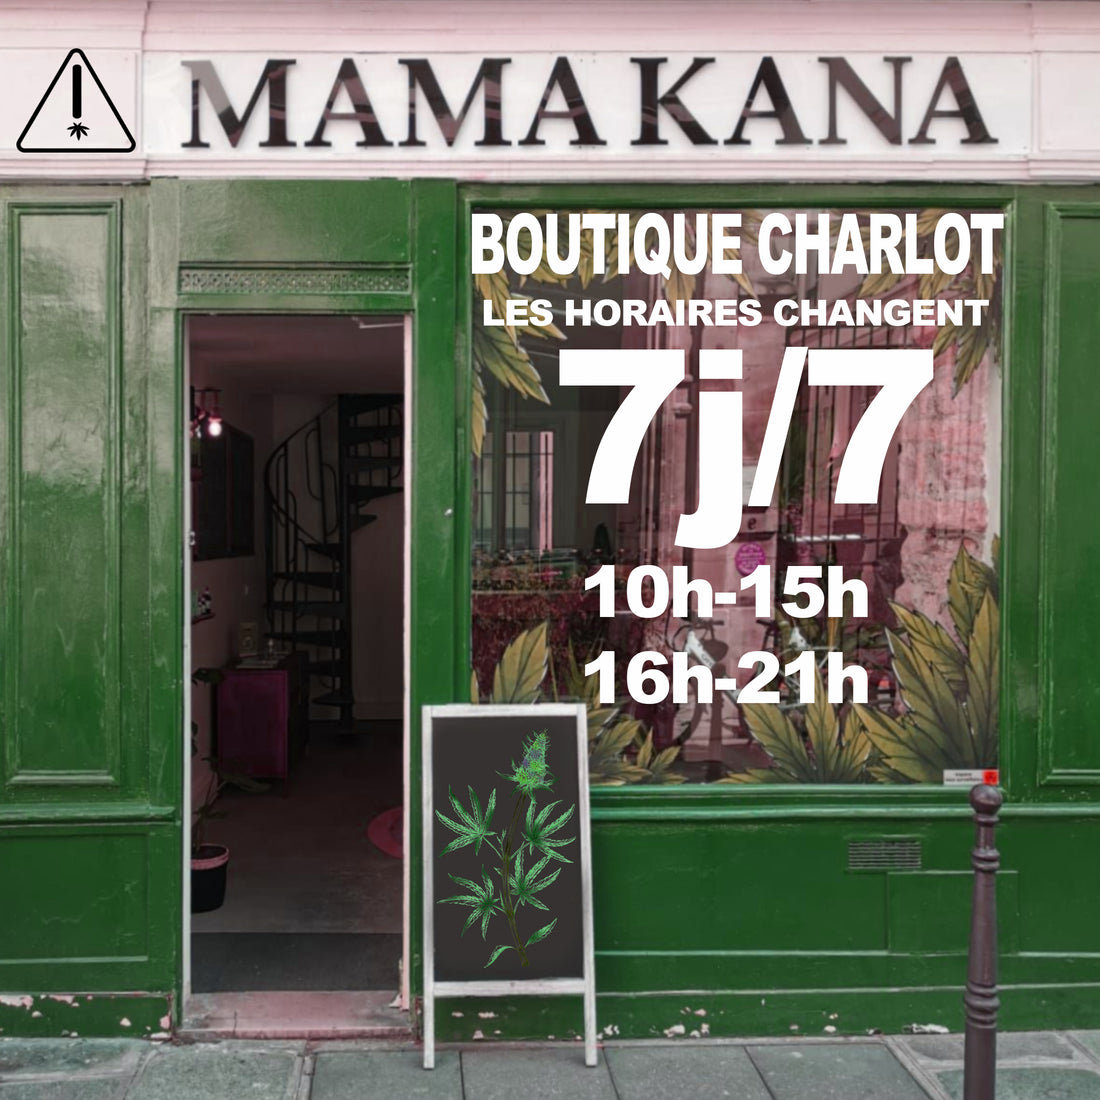 Boutique Charlot - Opening hours are changing!